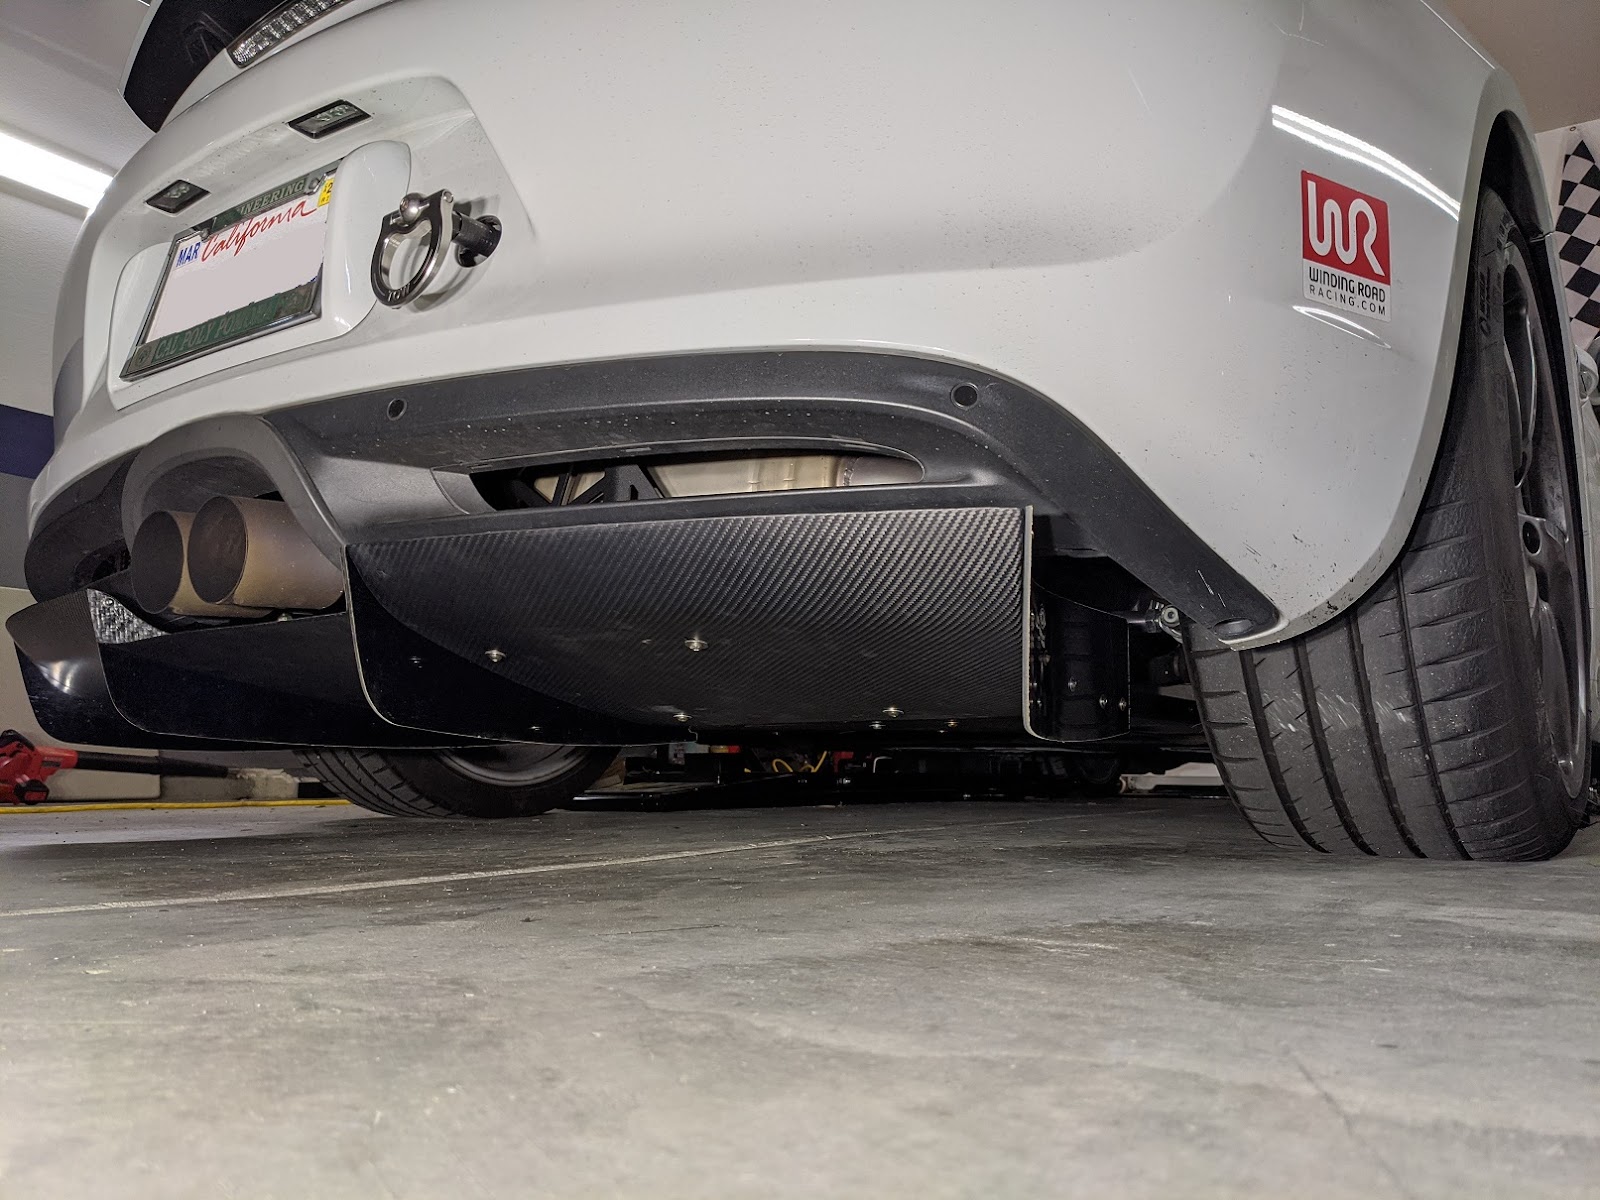 Porsche Cayman GT4 with aftermarket rear diffuser